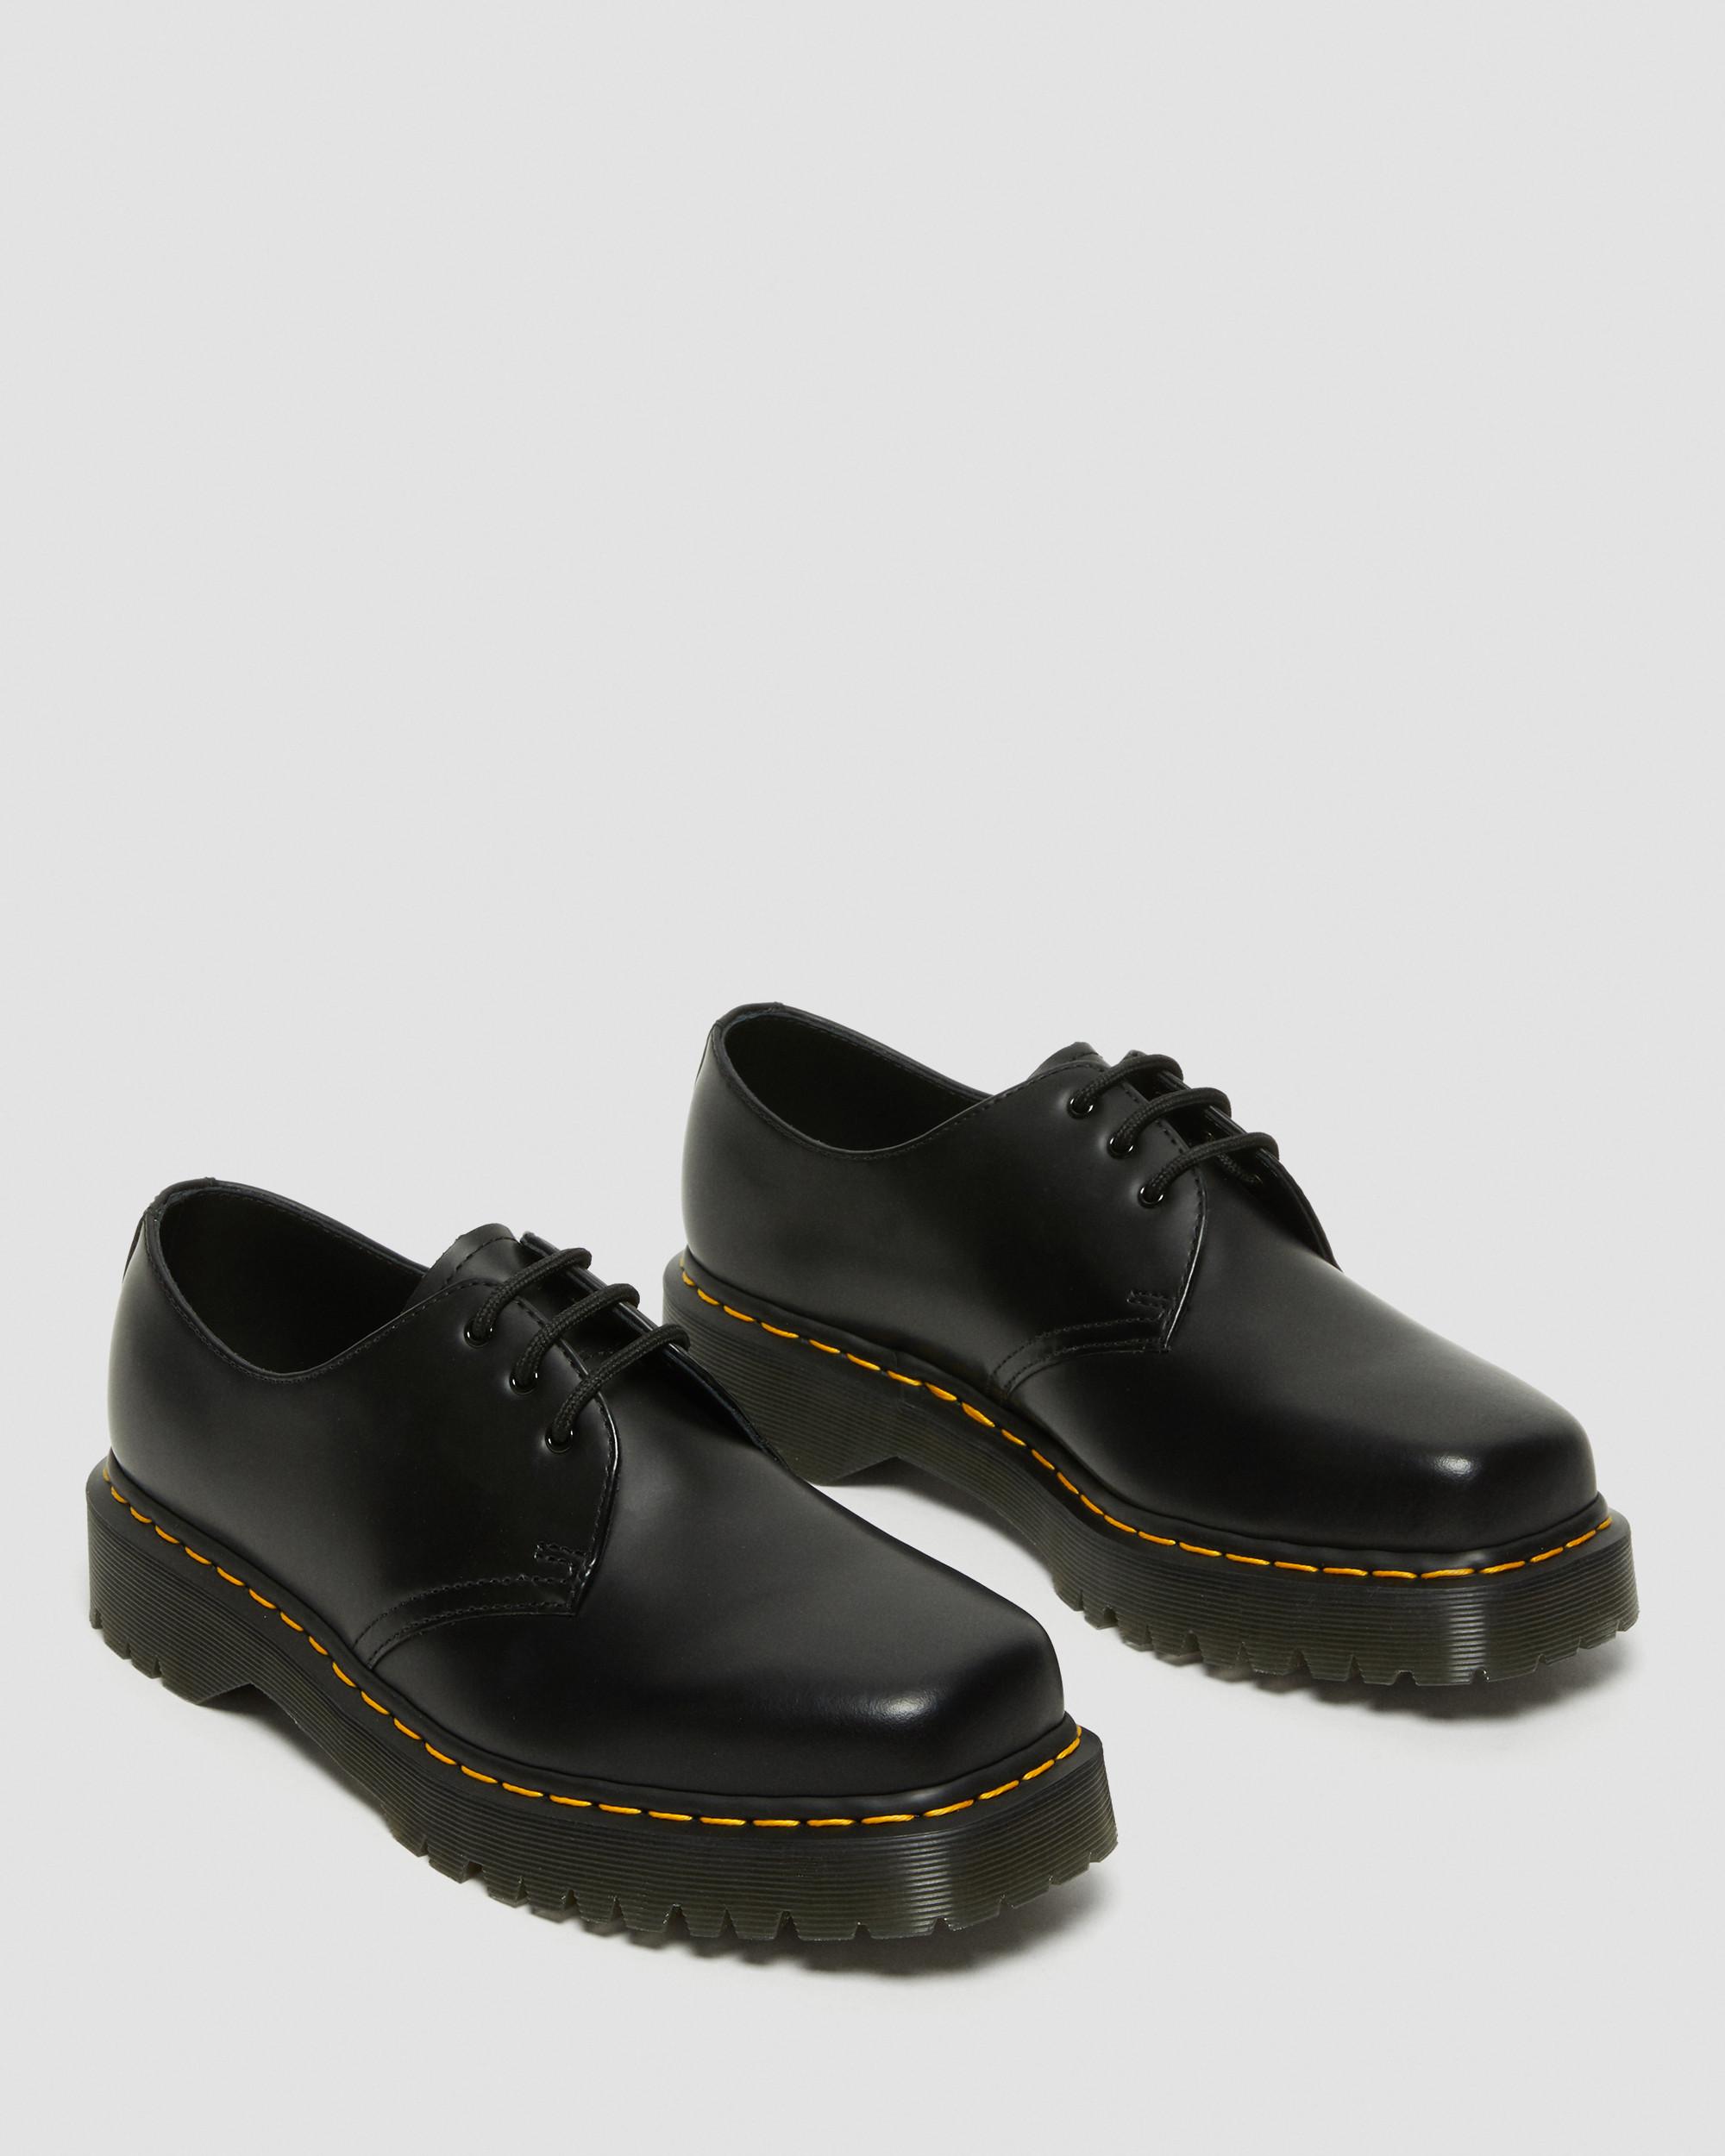 1461 Bex Squared Toe Leather Shoes | Dr. Martens